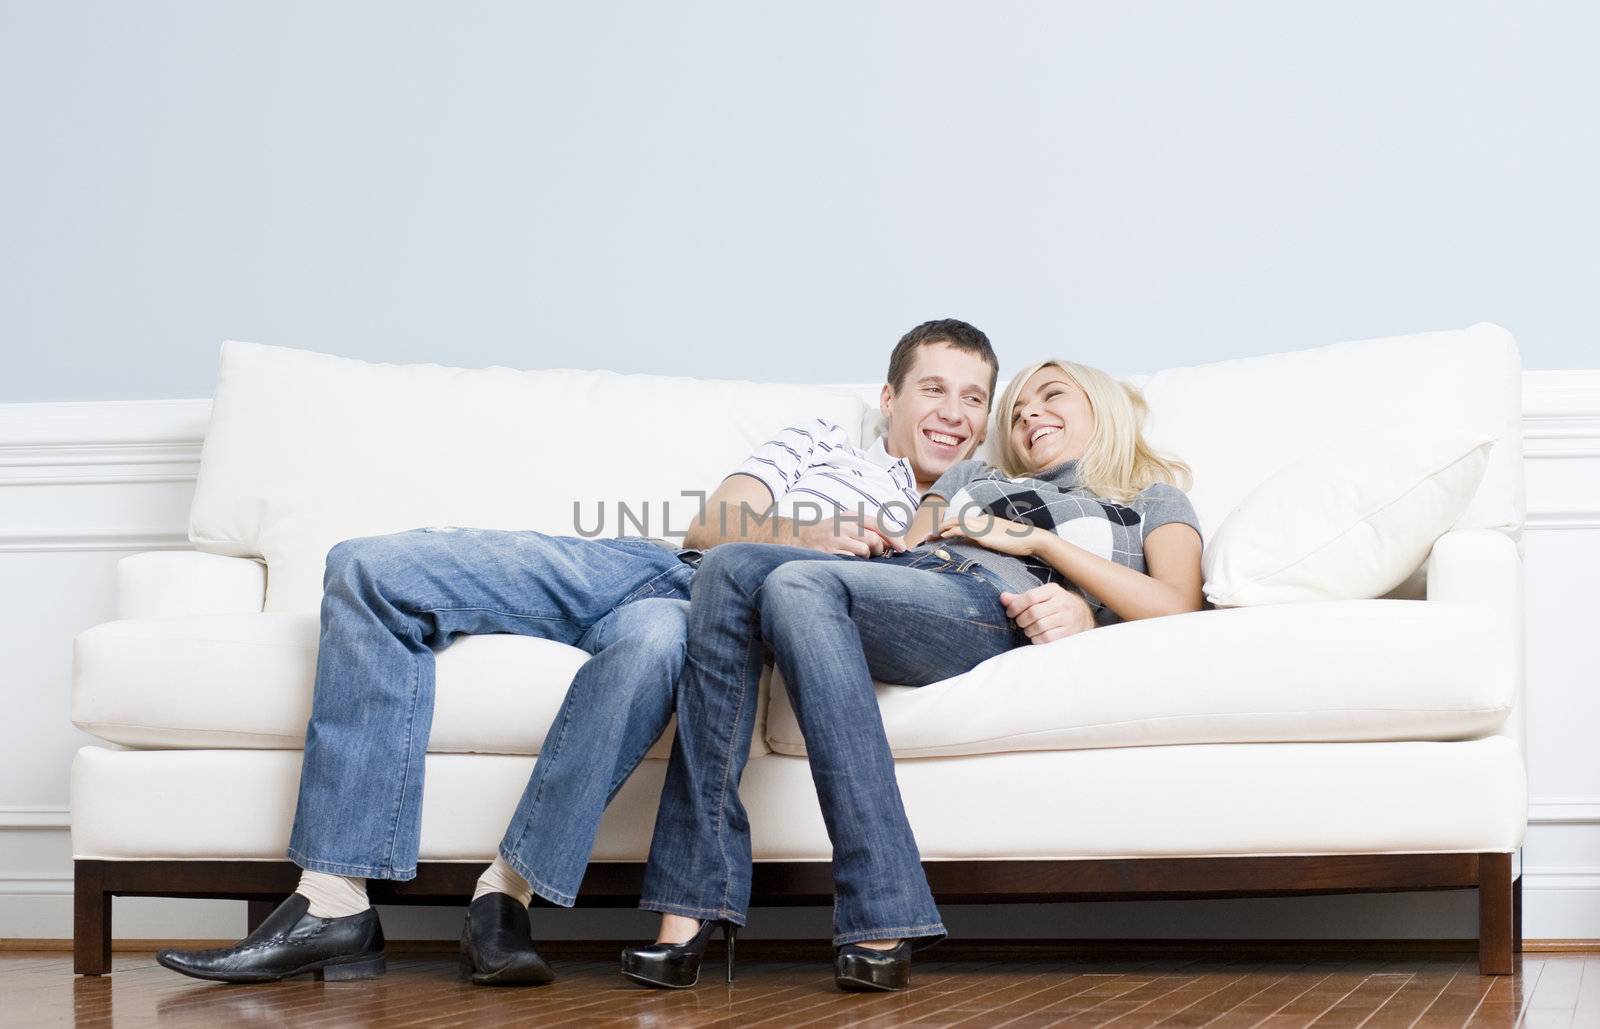 Affectionate Couple Laughing and Relaxing on Couch by cardmaverick